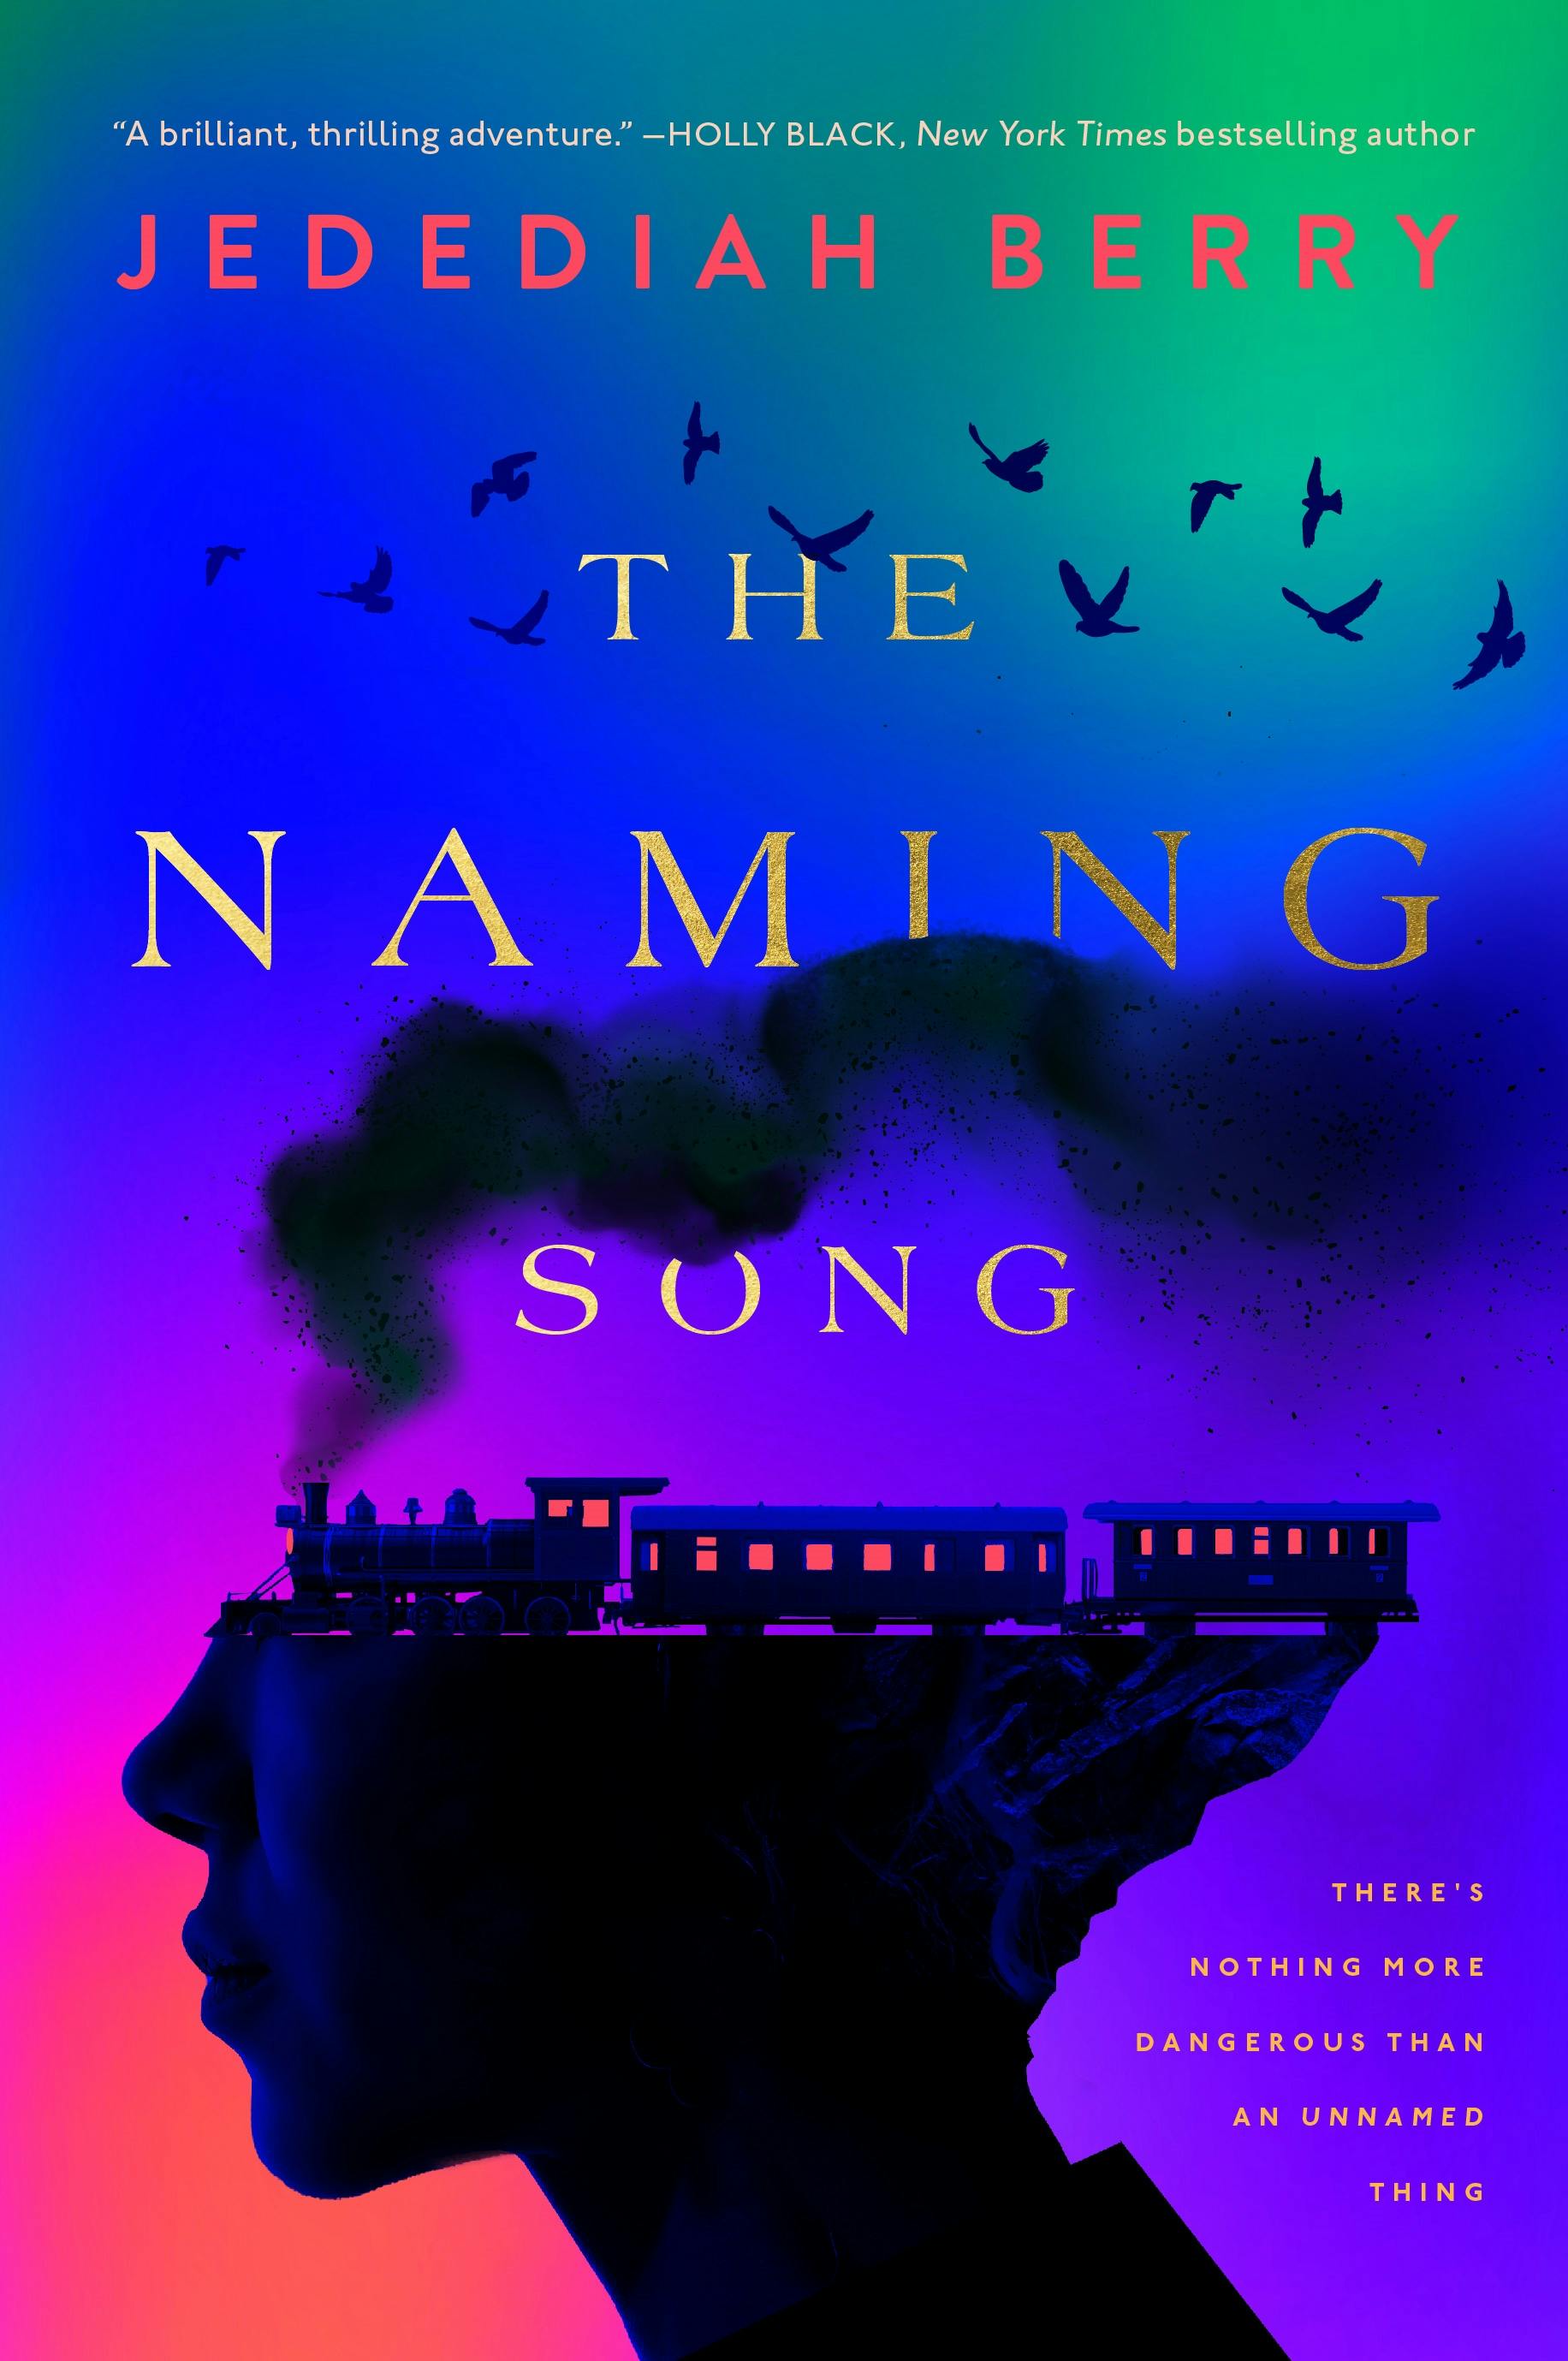 Cover for the book titled as: The Naming Song